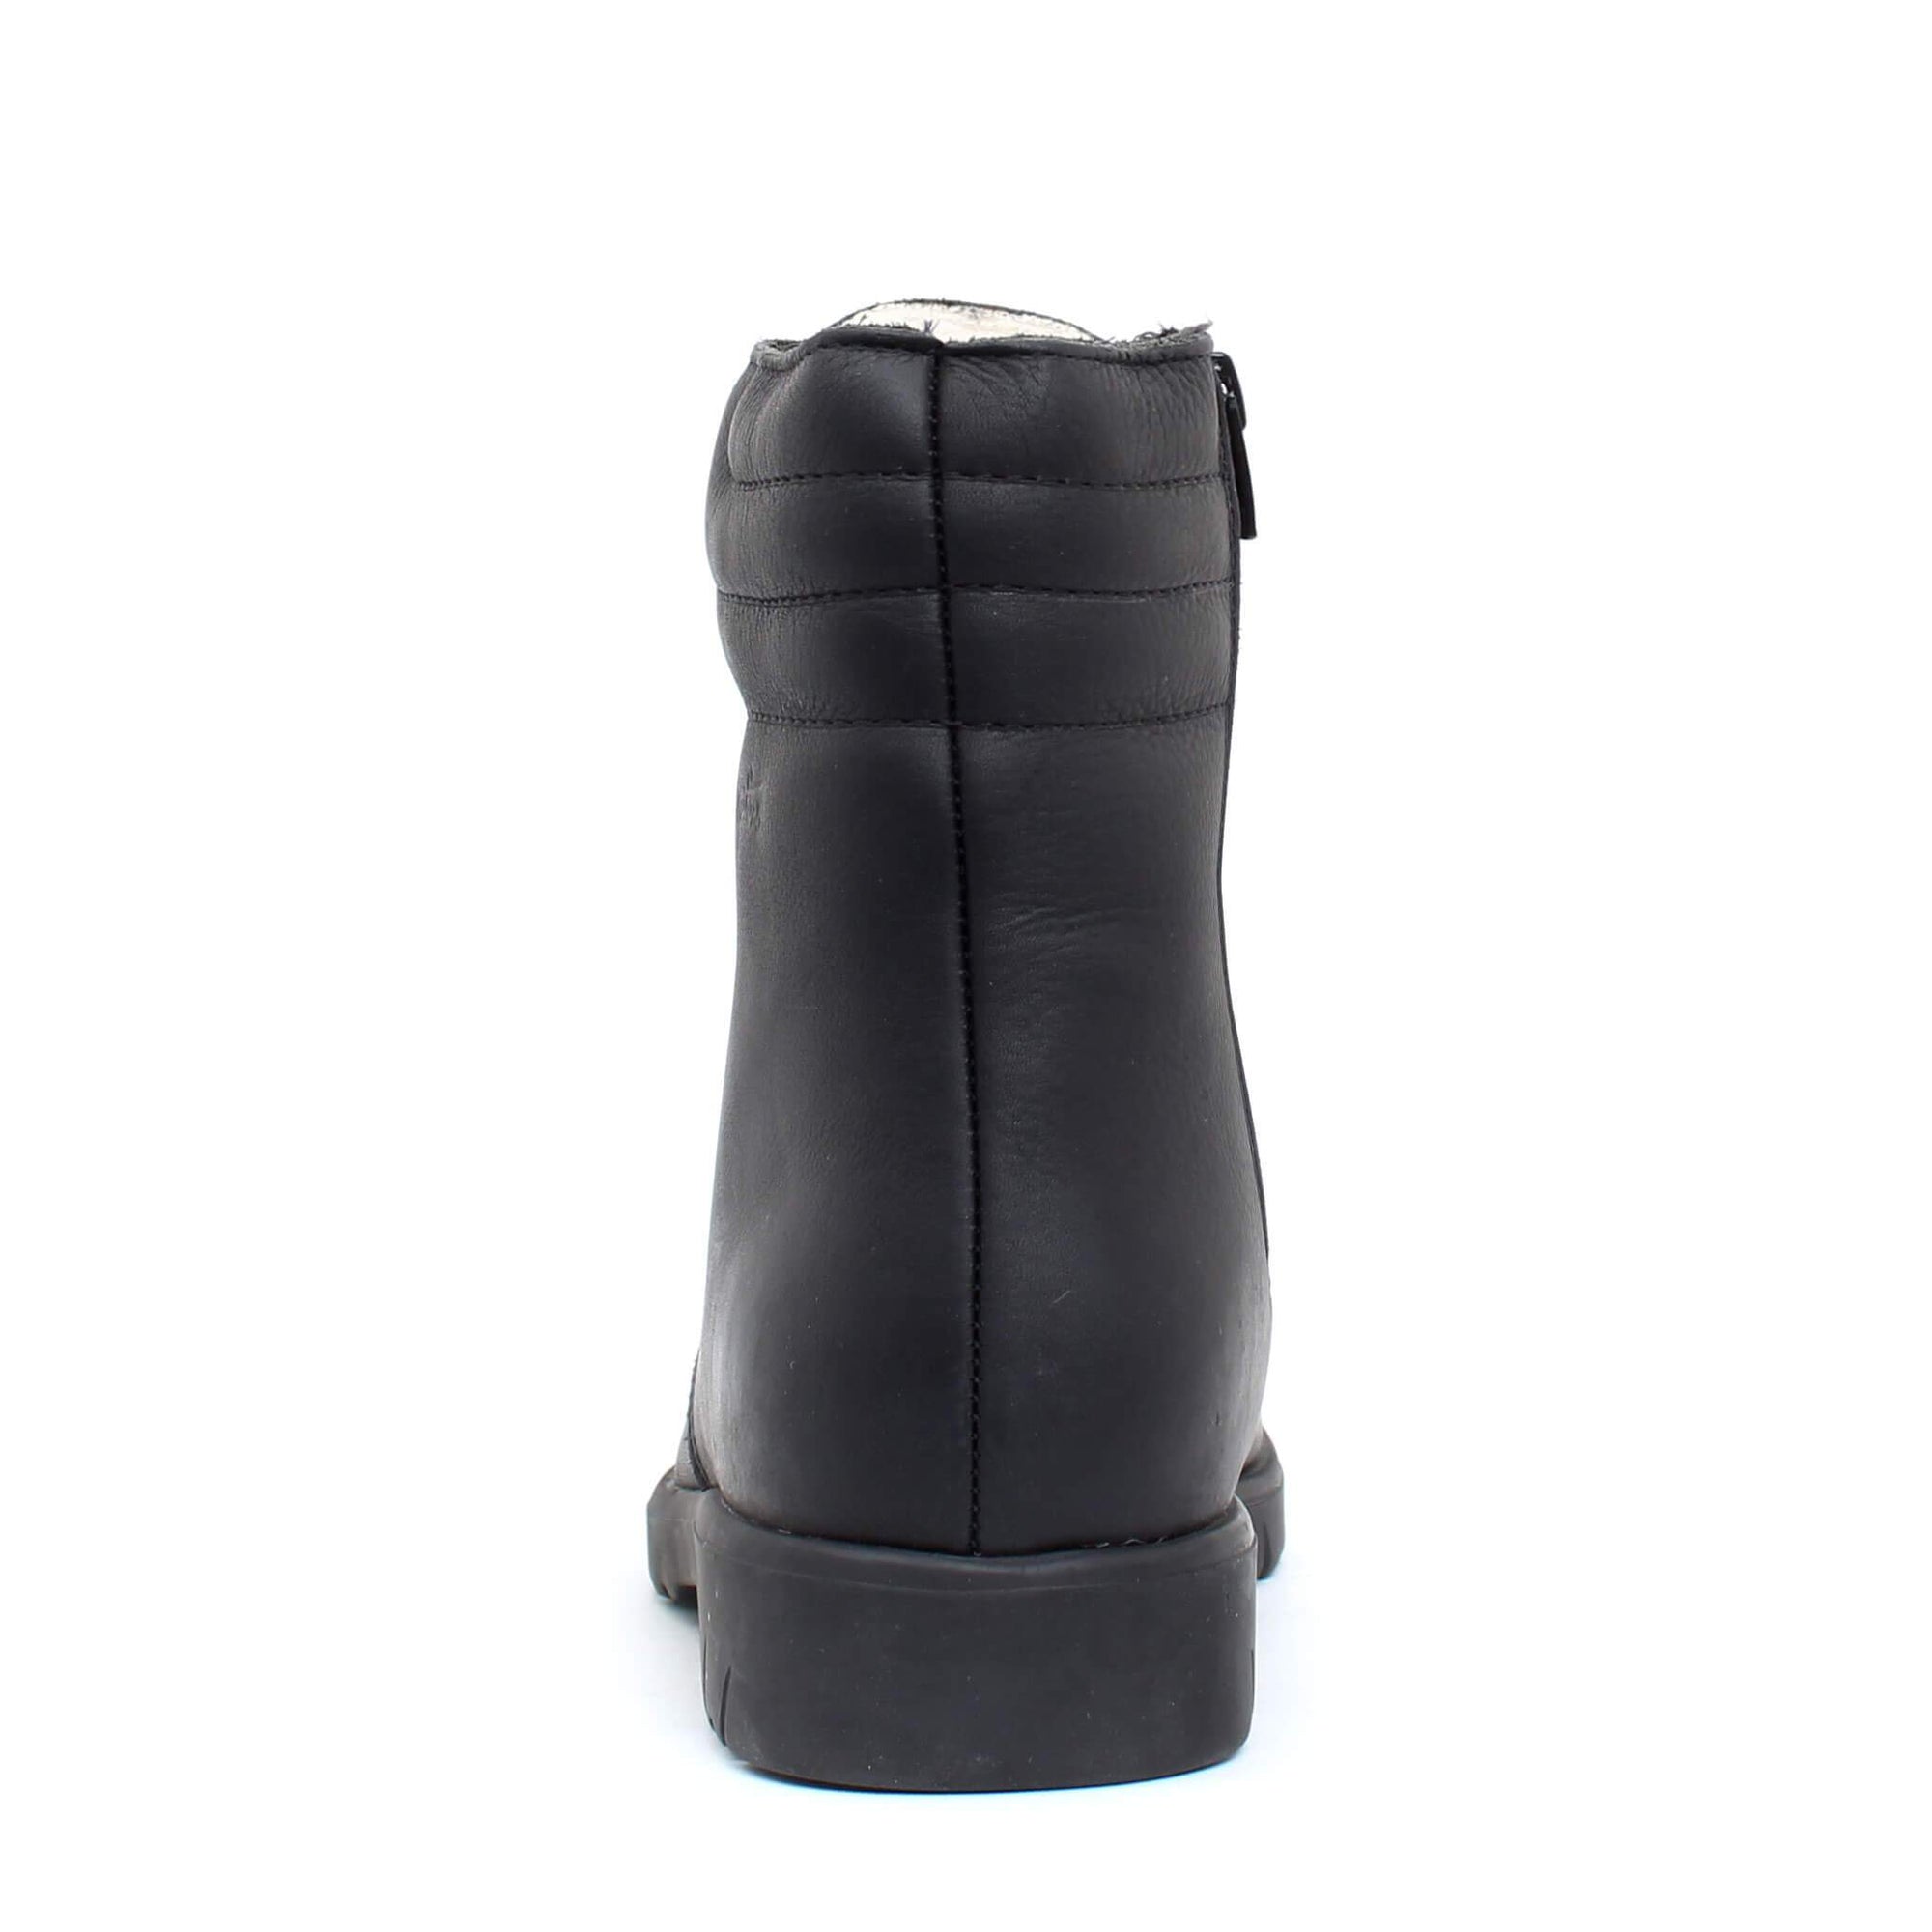 New Paolo winter boot for men - Black 